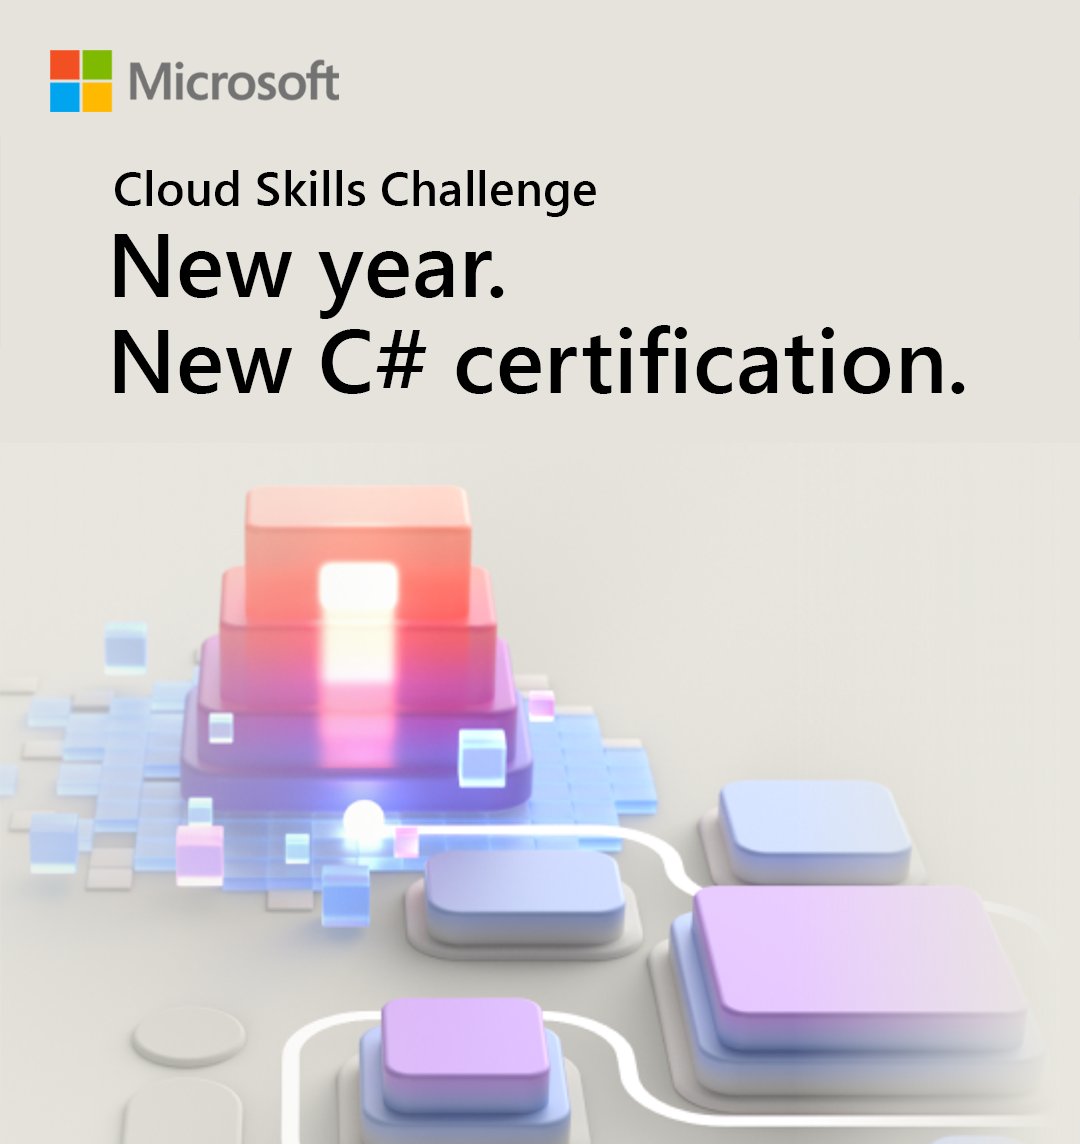 Get your C# certification in 2024. Join the #Csharp #CloudSkillsChallenge to complete curated #MicrosoftLearn content, get hands-on experience, and develop new skills. Kick-start your C# learning and get you closer to completing the C# certification. msft.it/6015ilmS7